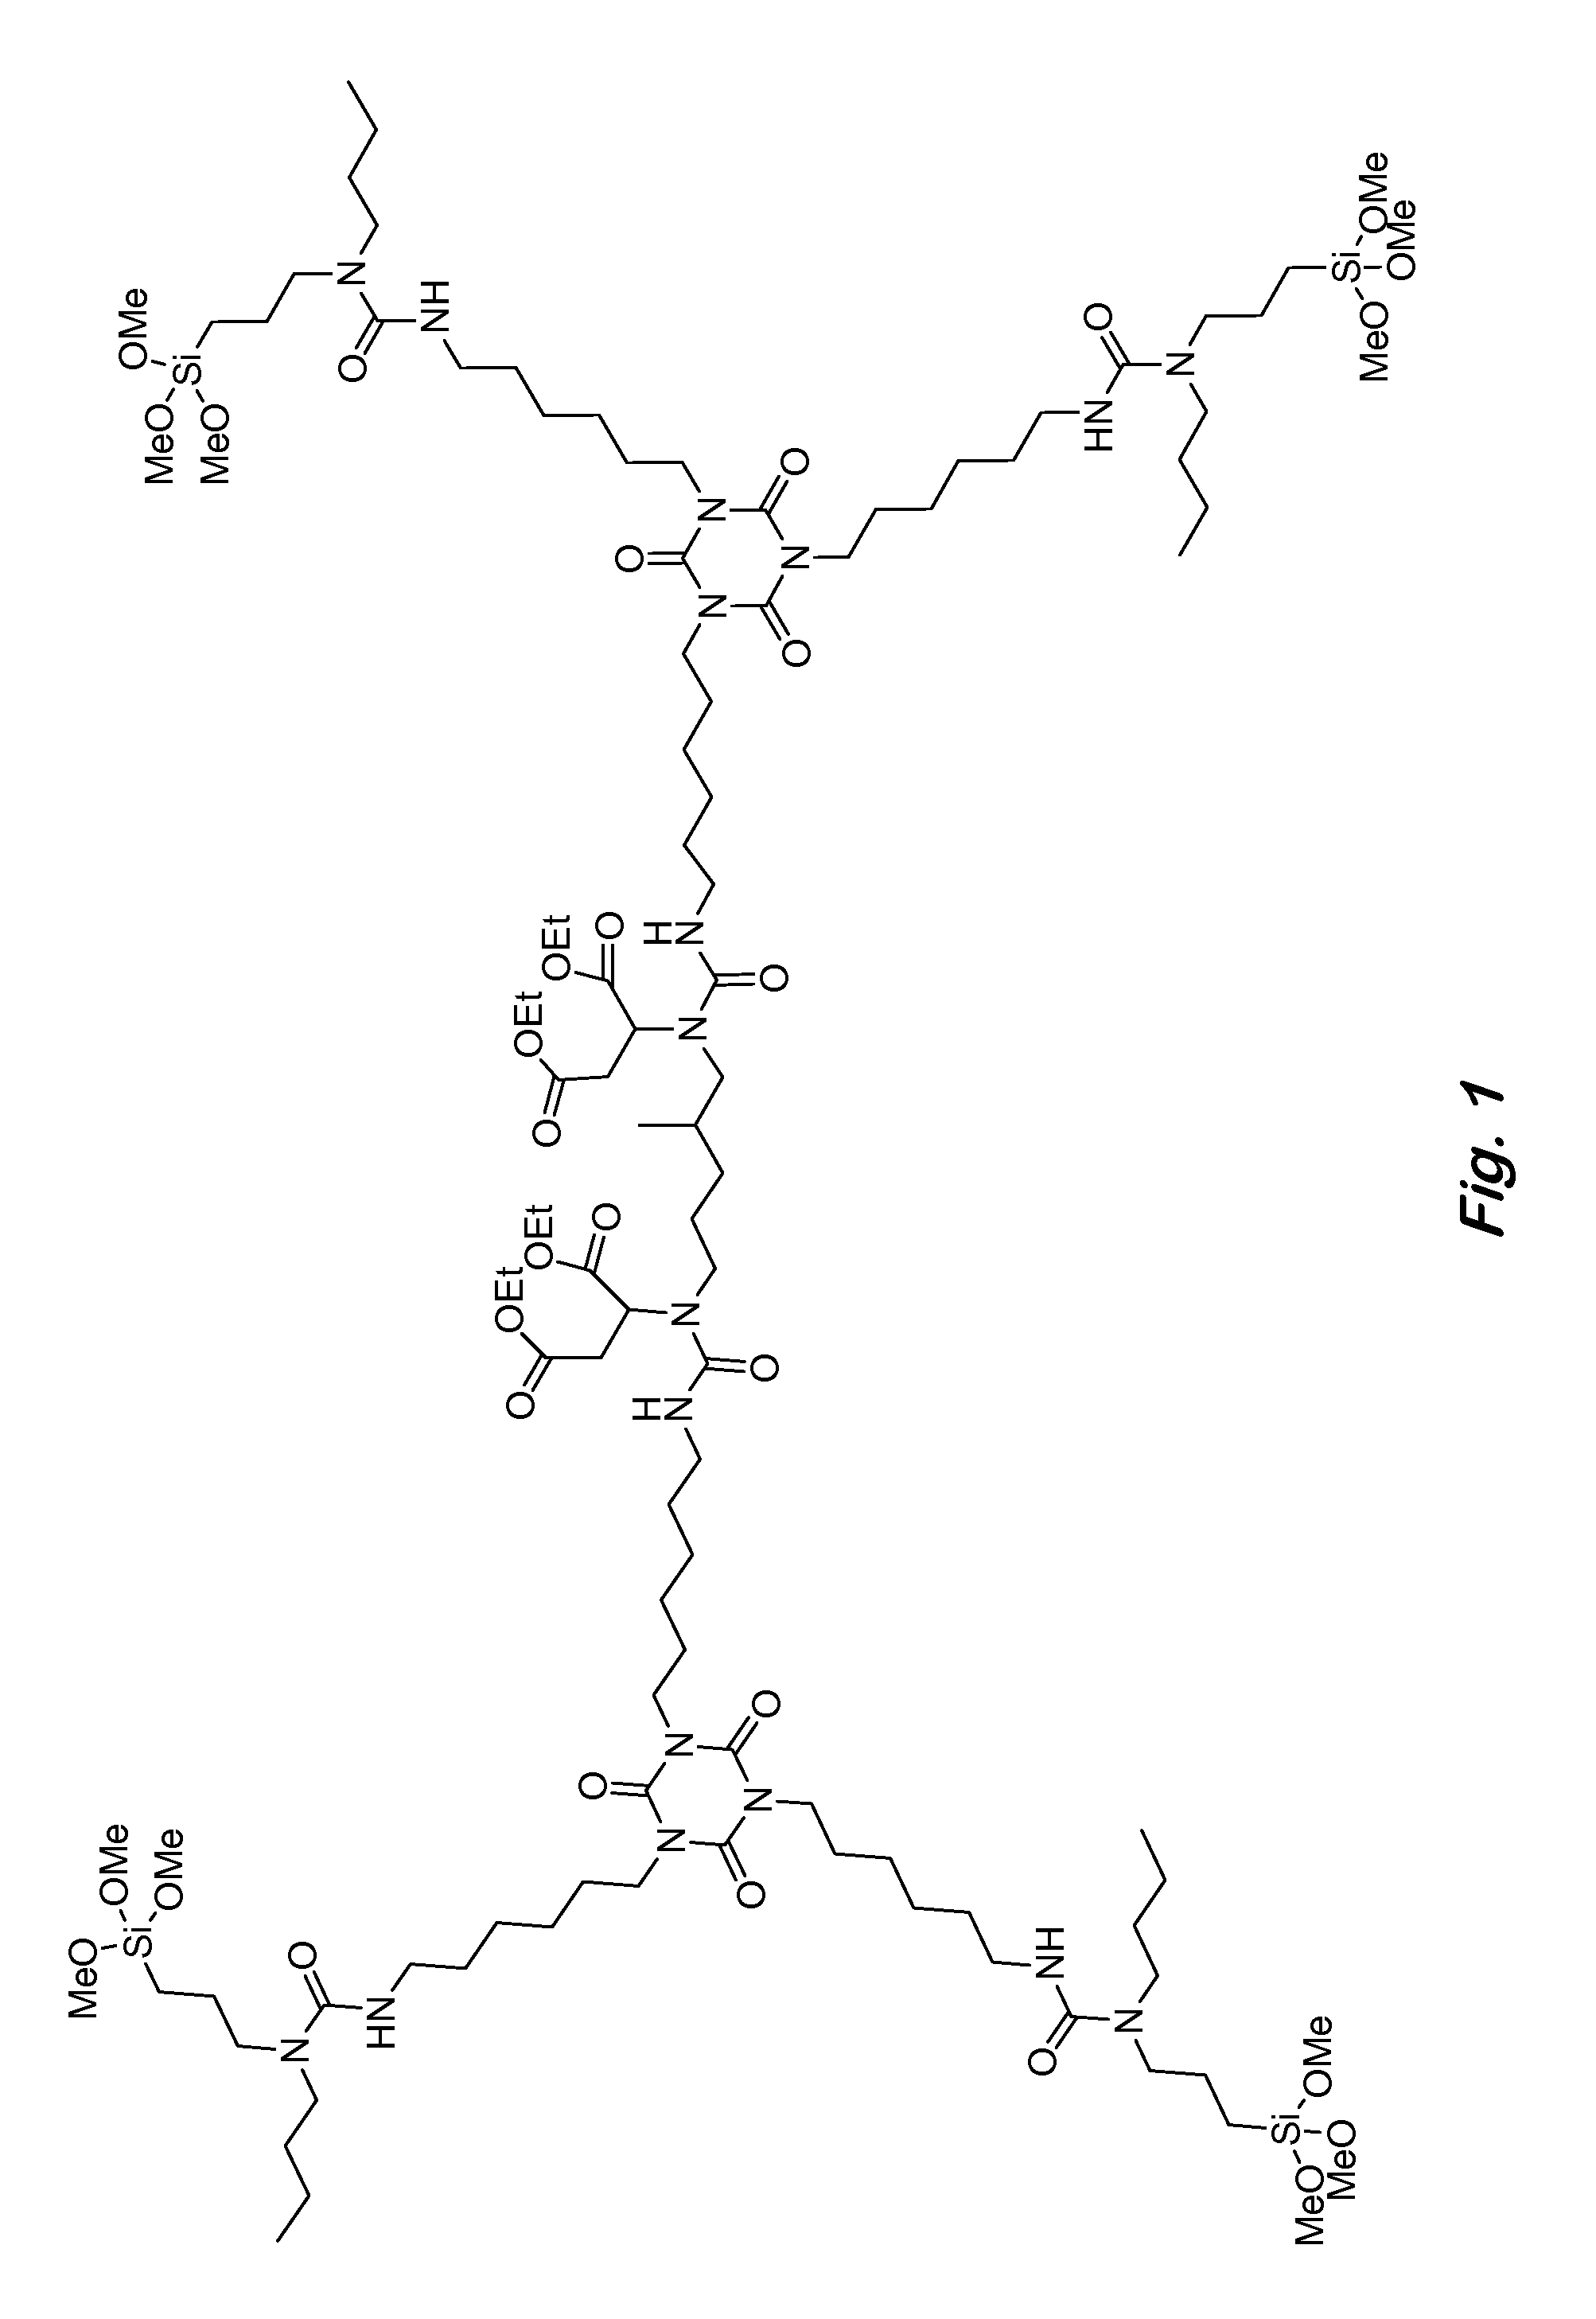 Two-component siloxane-based coatings containing polymers with urea linkages and terminal alkoxysilanes